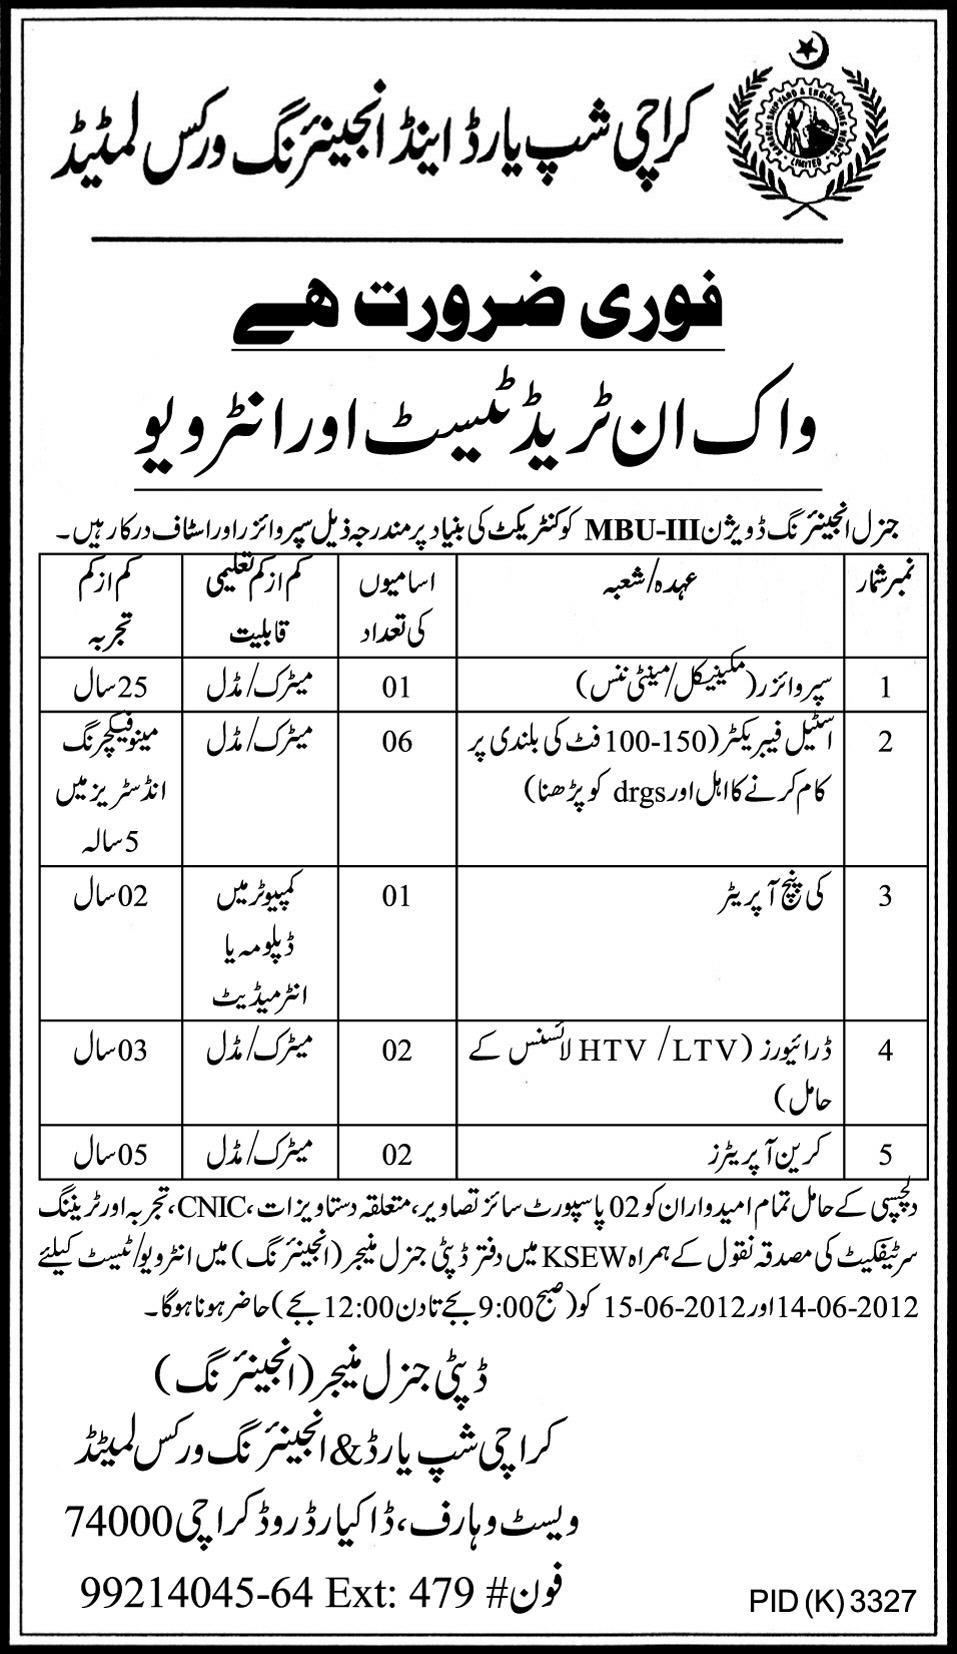 Technical Staff and Key Punch Operator Required at Karachi Shipyard and Engineering Works Limitd (KSEW)